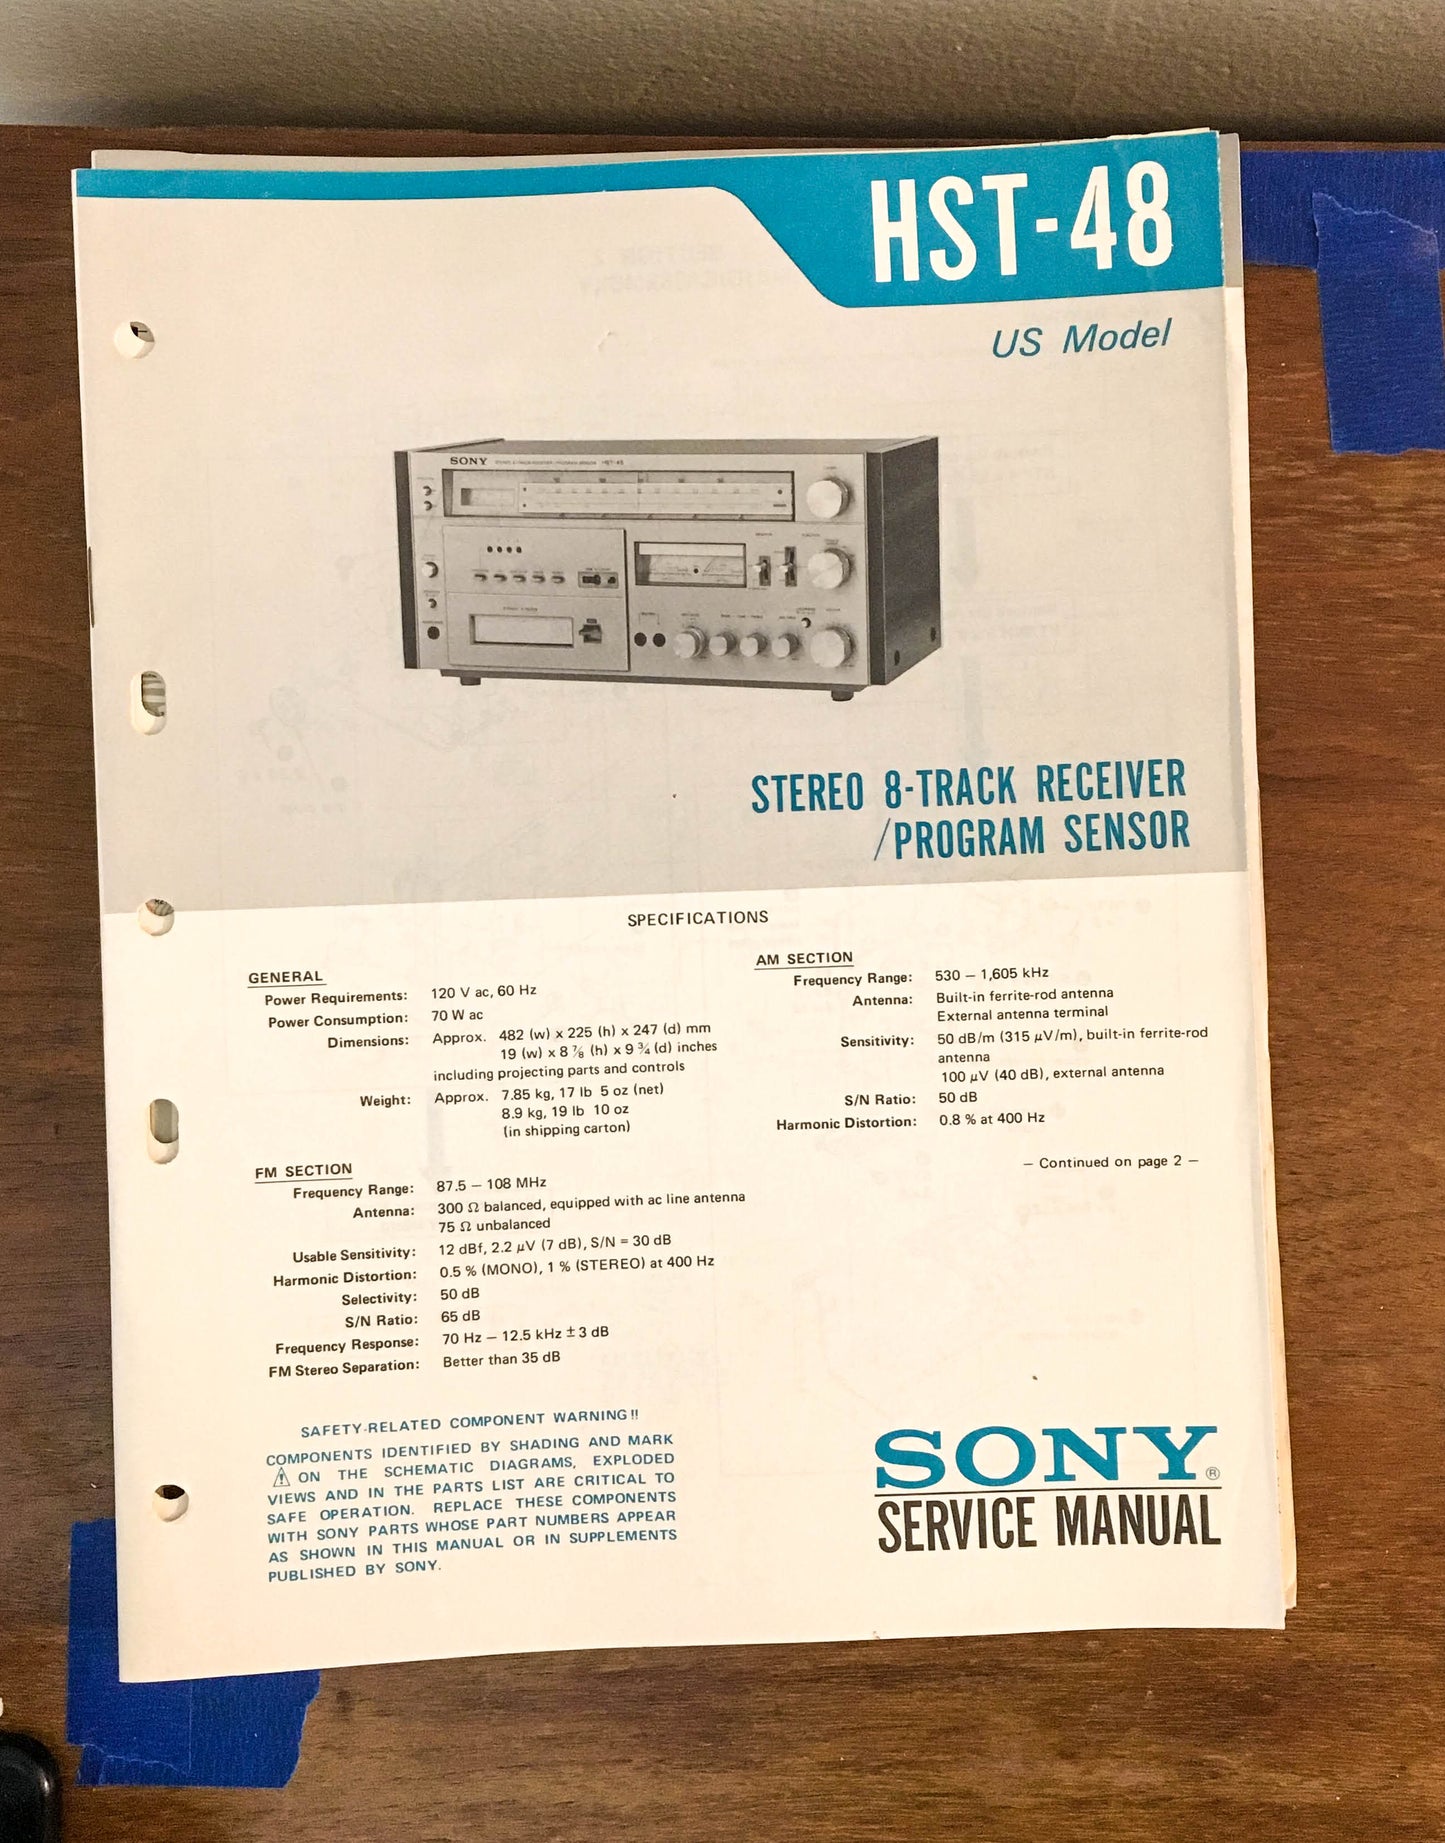 Sony HST-48 Stereo Music System Service Manual *Original*